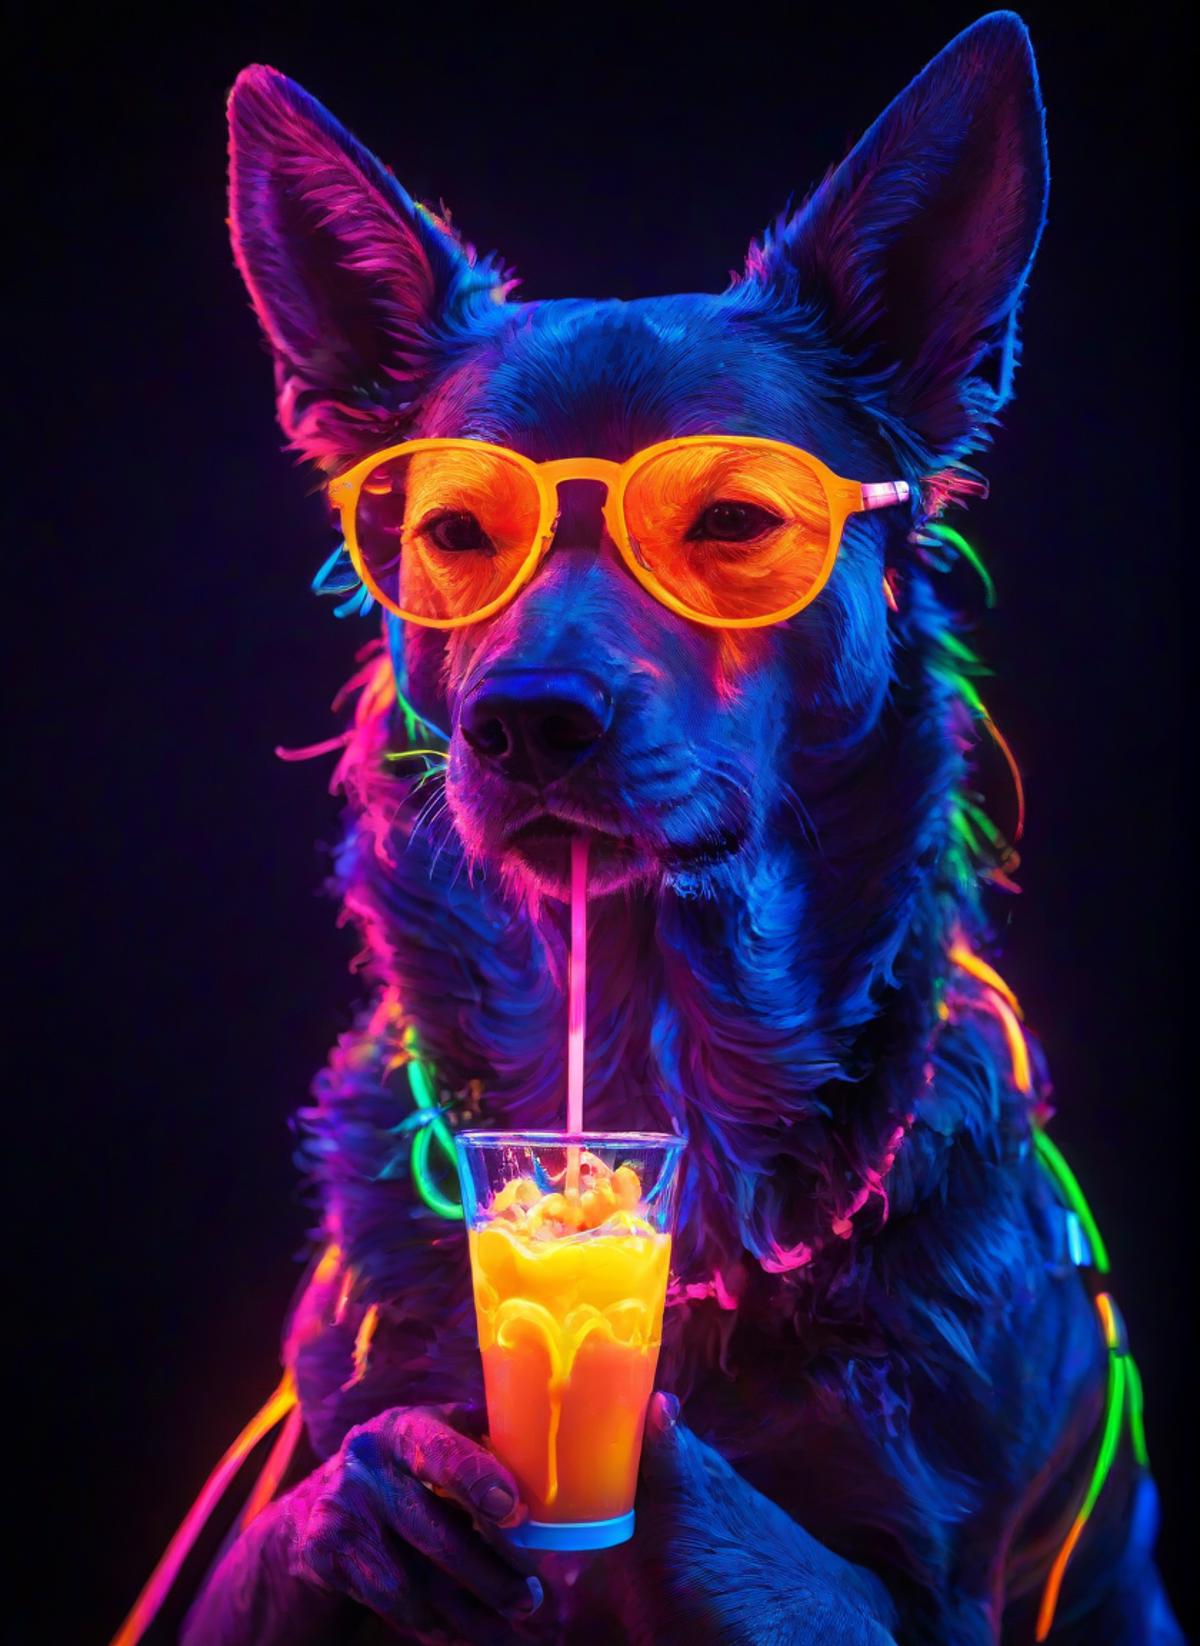 PE Neon UV Diffusion [Style] image by Proompt_Engineer